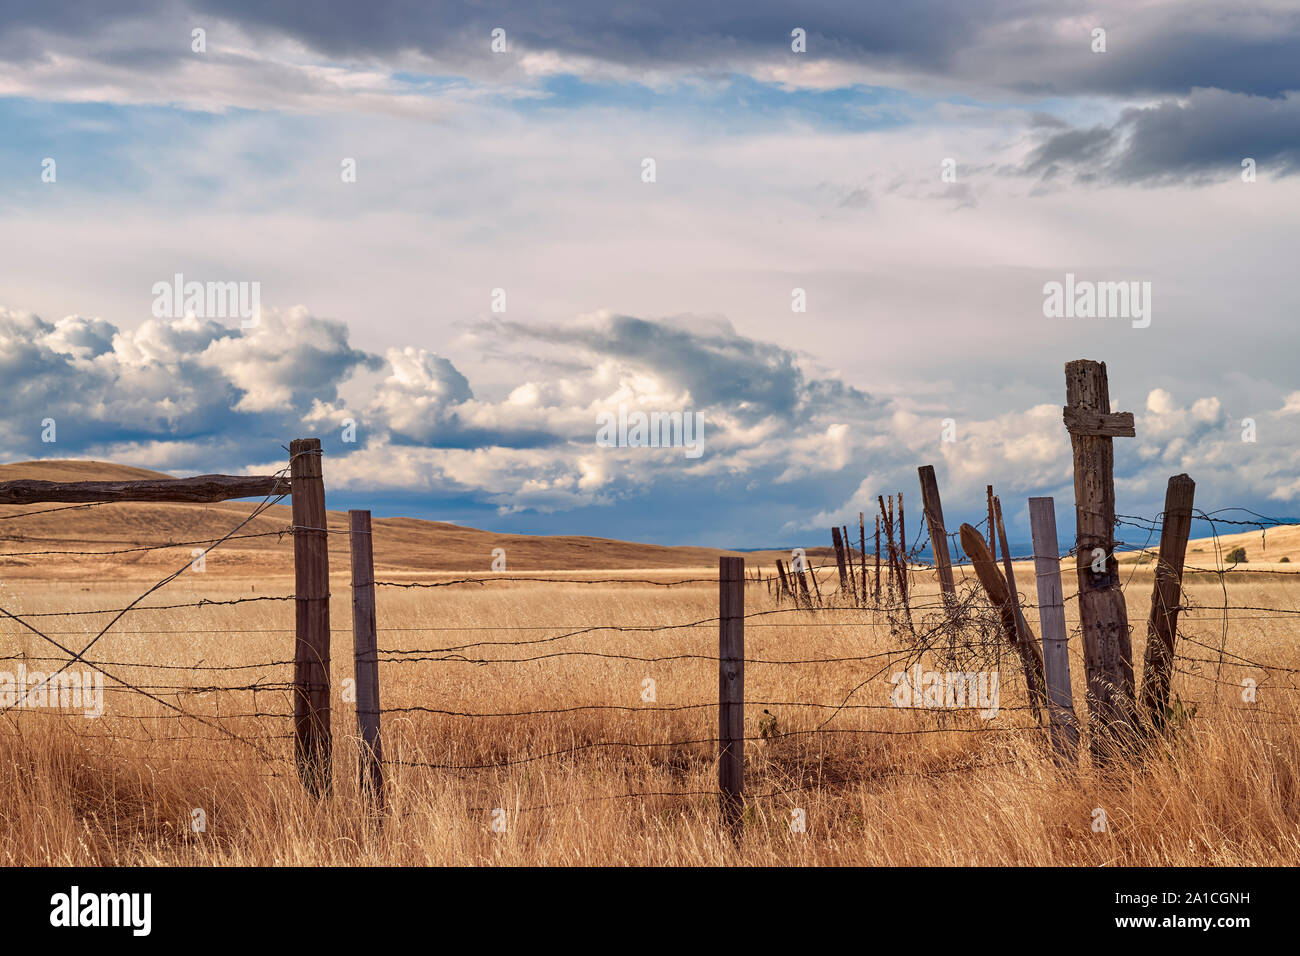 Rural country scene with a barbed wire fence passing through a pasture full of tall brown grass while storm clouds pass overhead. Stock Photo